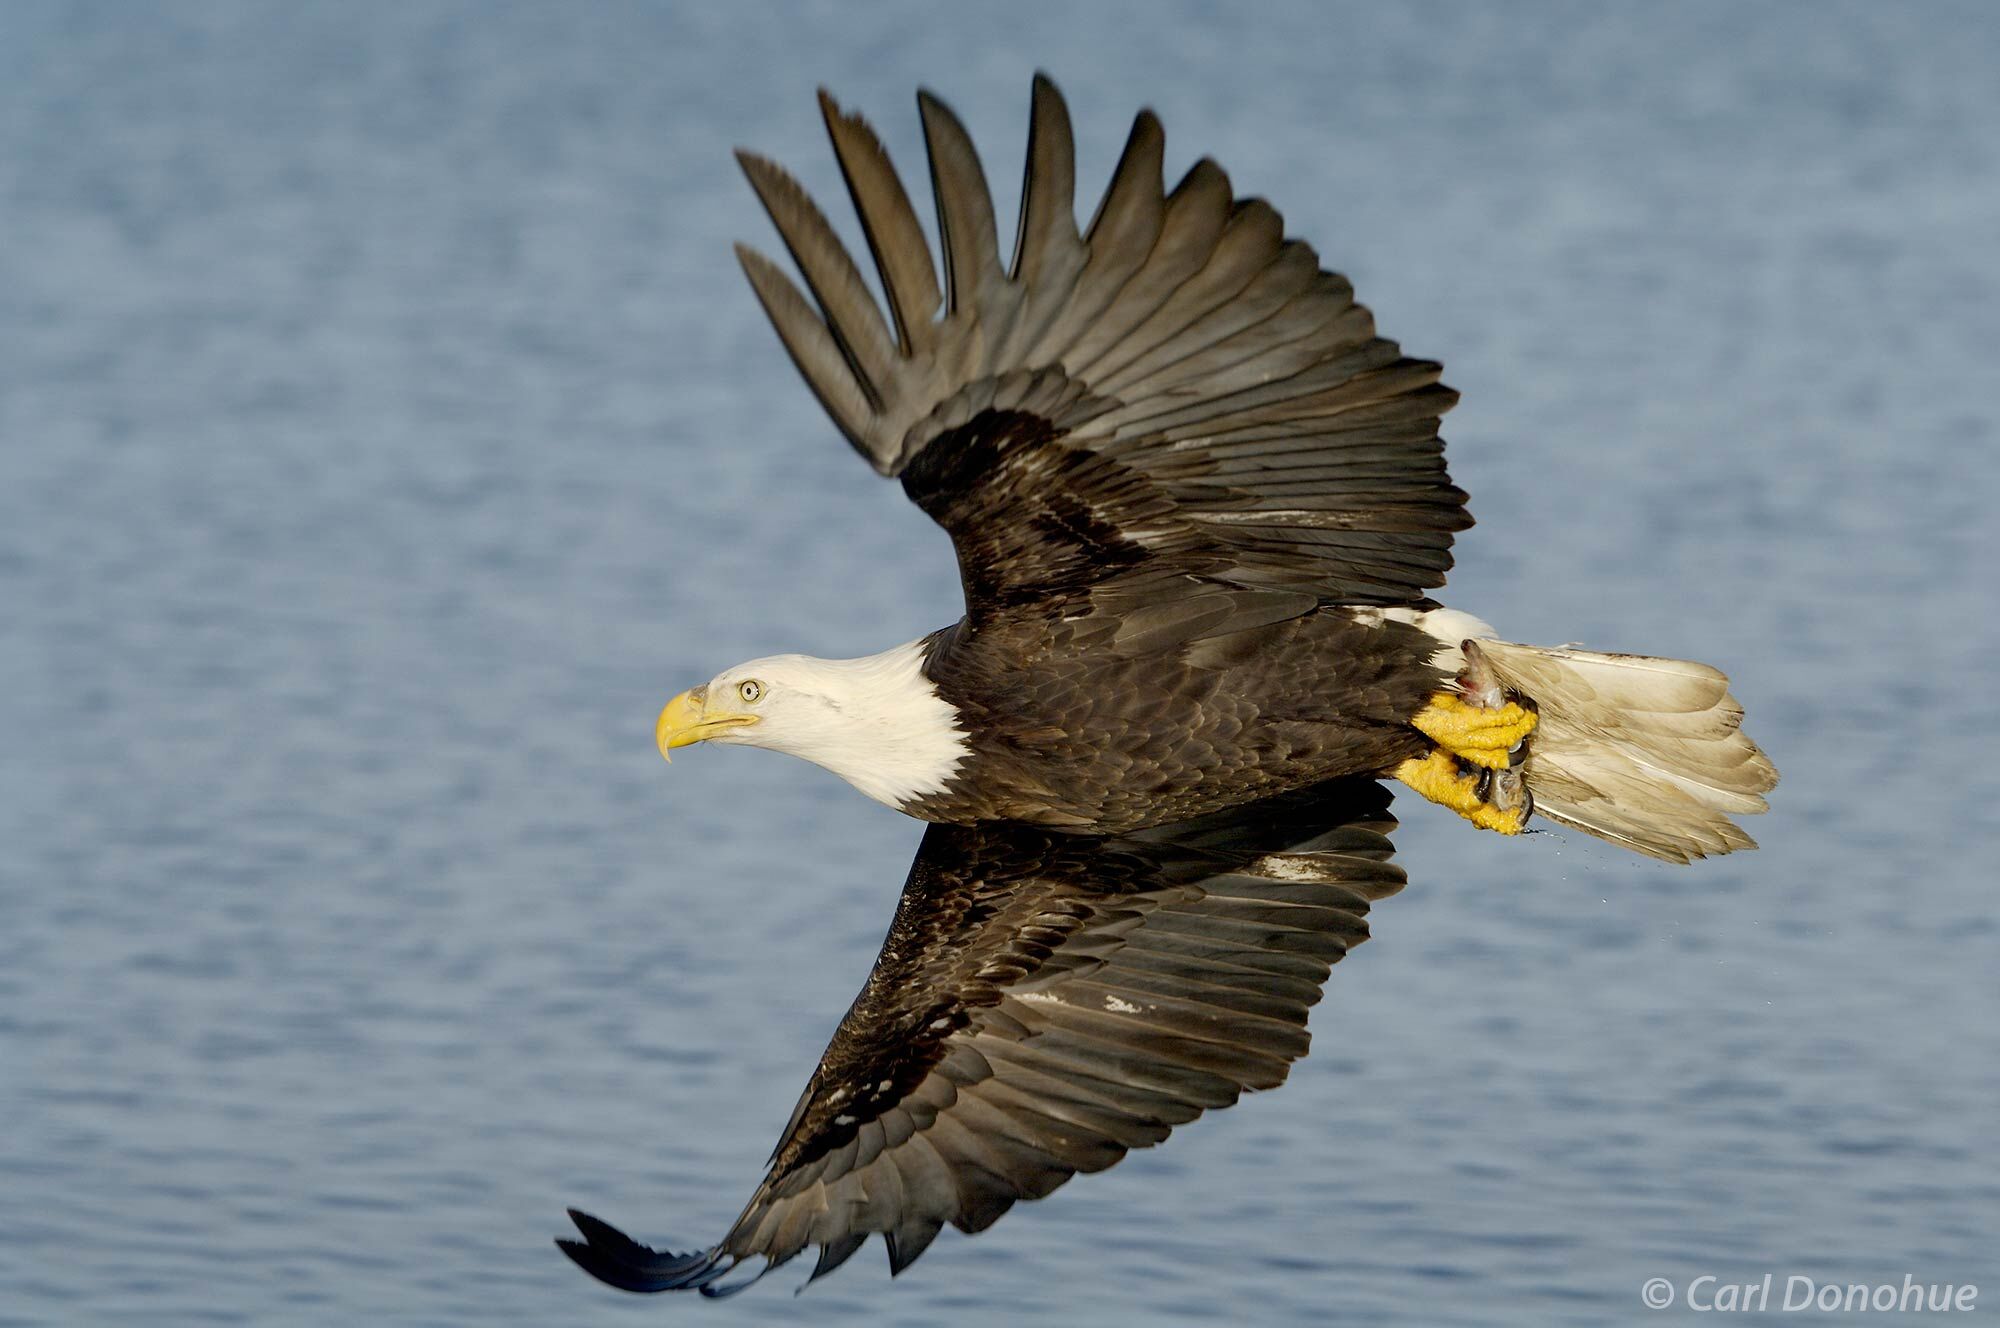 The bald eagle is a formidable predator in the skies above Kachemak Bay, using its sharp talons and powerful wings to catch fish...